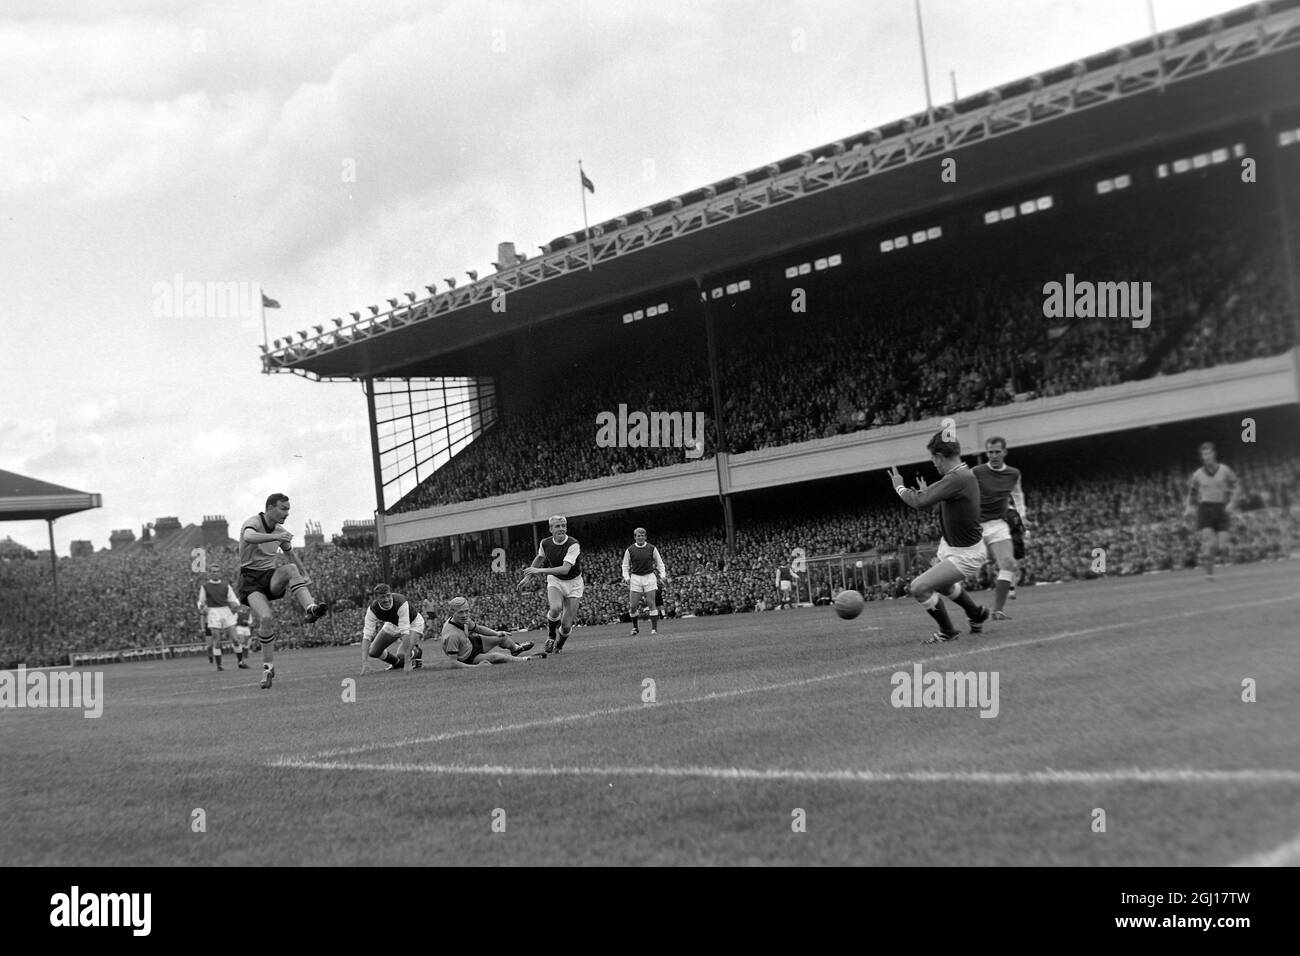 FOOTBALL ARSENAL V WOLVERHAMPTON WOLVES IAN URES 1ST APPEARANCE FOR ARSENAL JIM MURRAY SHOOTS WATCHED BY OTHERS ; 24 AUGUST 1963 Stock Photo